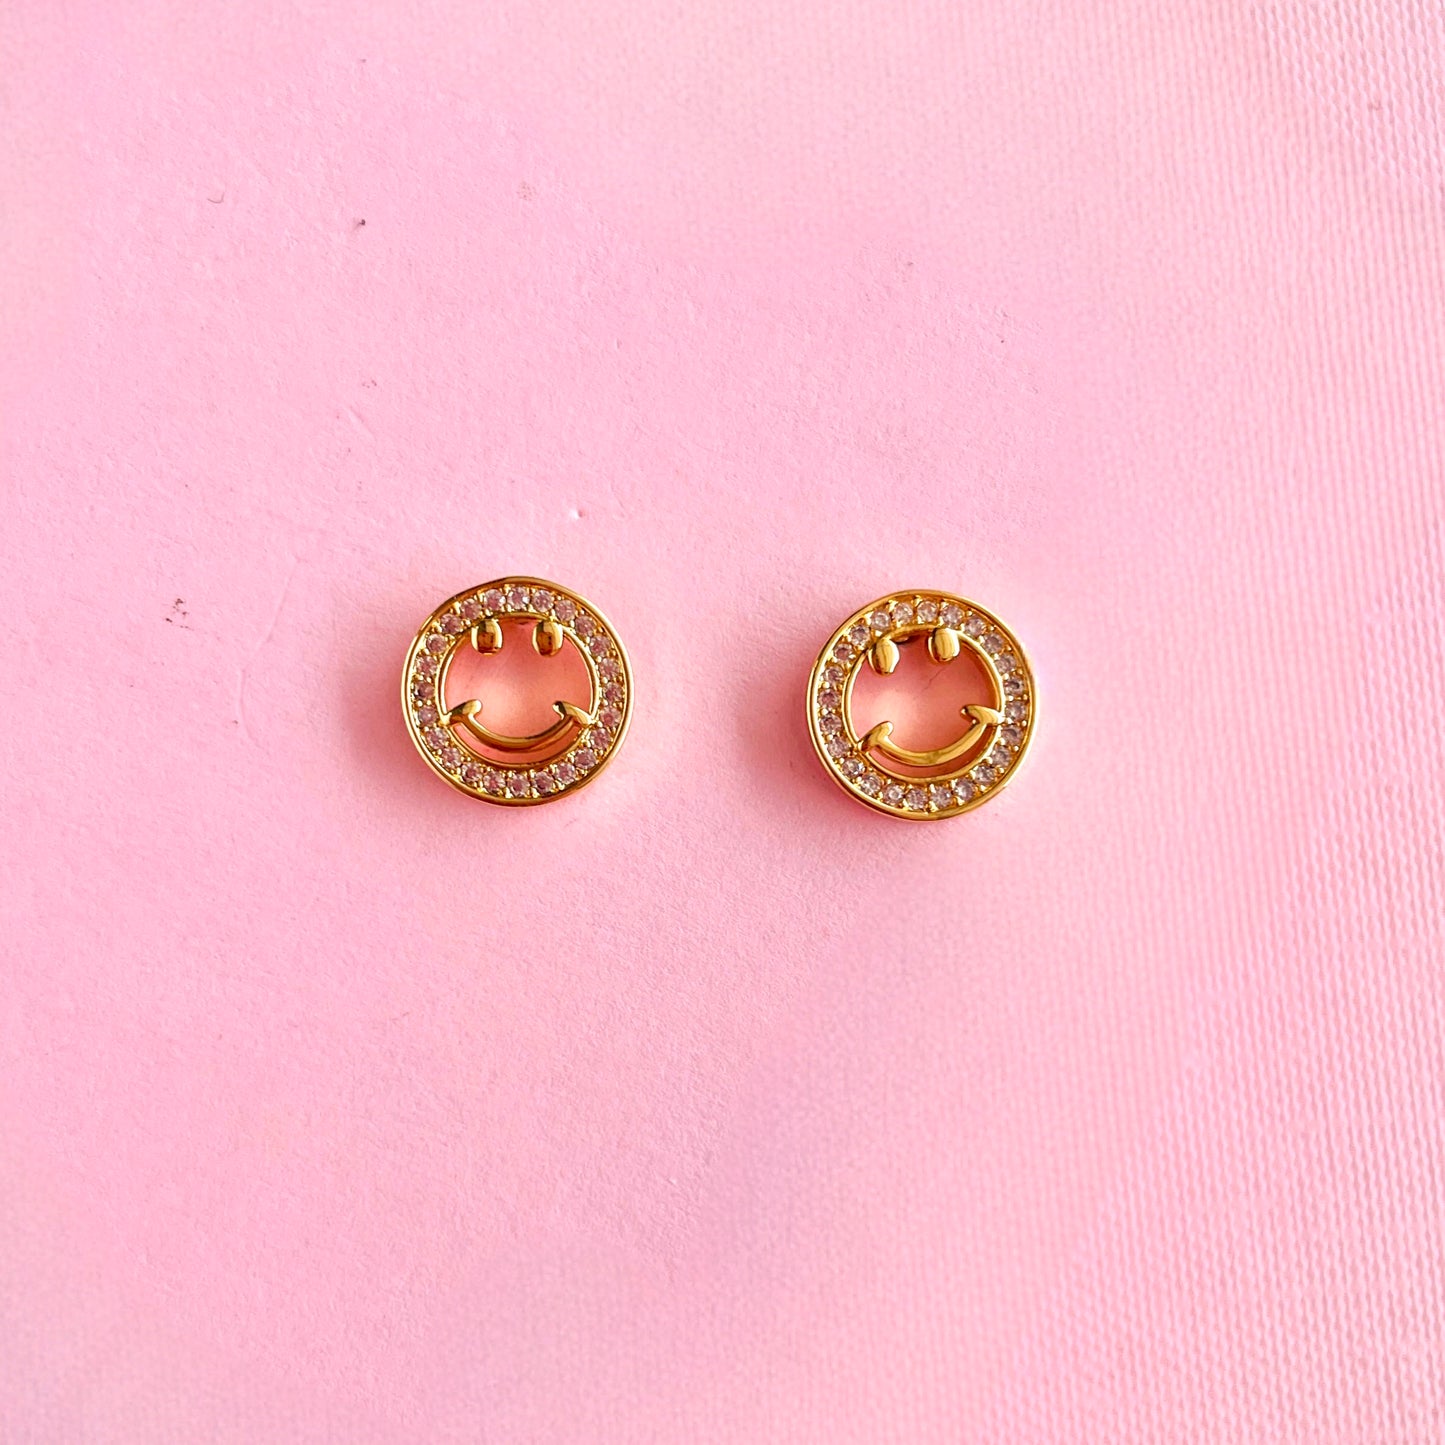 Gold and sparkly  Smiley Face Studs Earrings - Las Ofrendas 